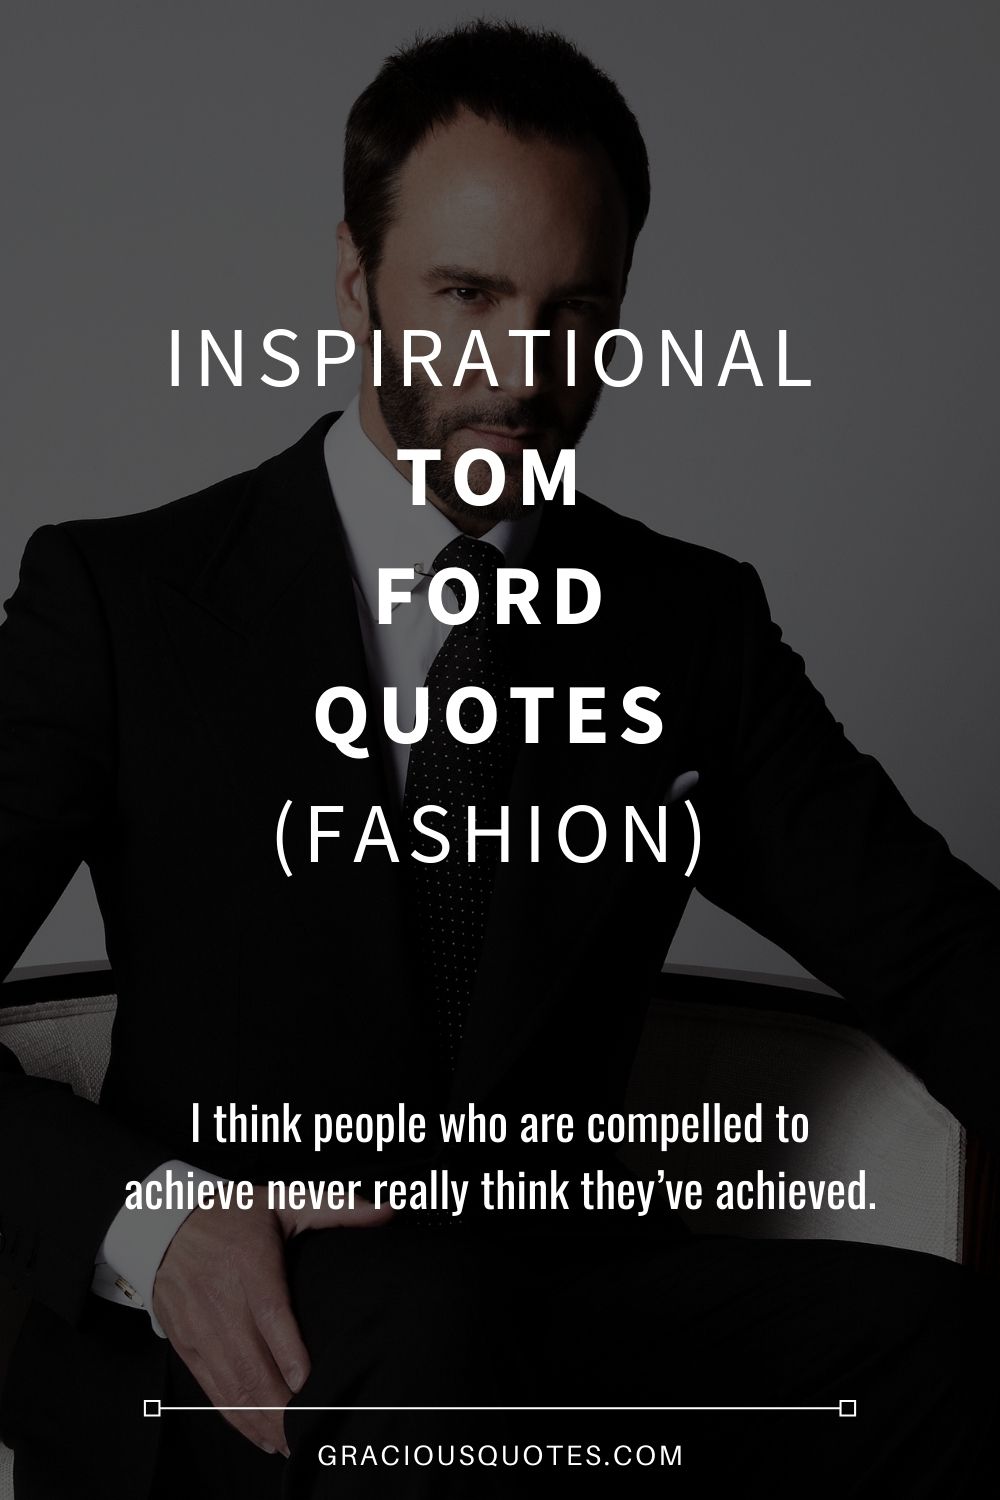 41 Inspirational Tom Ford Quotes (FASHION)